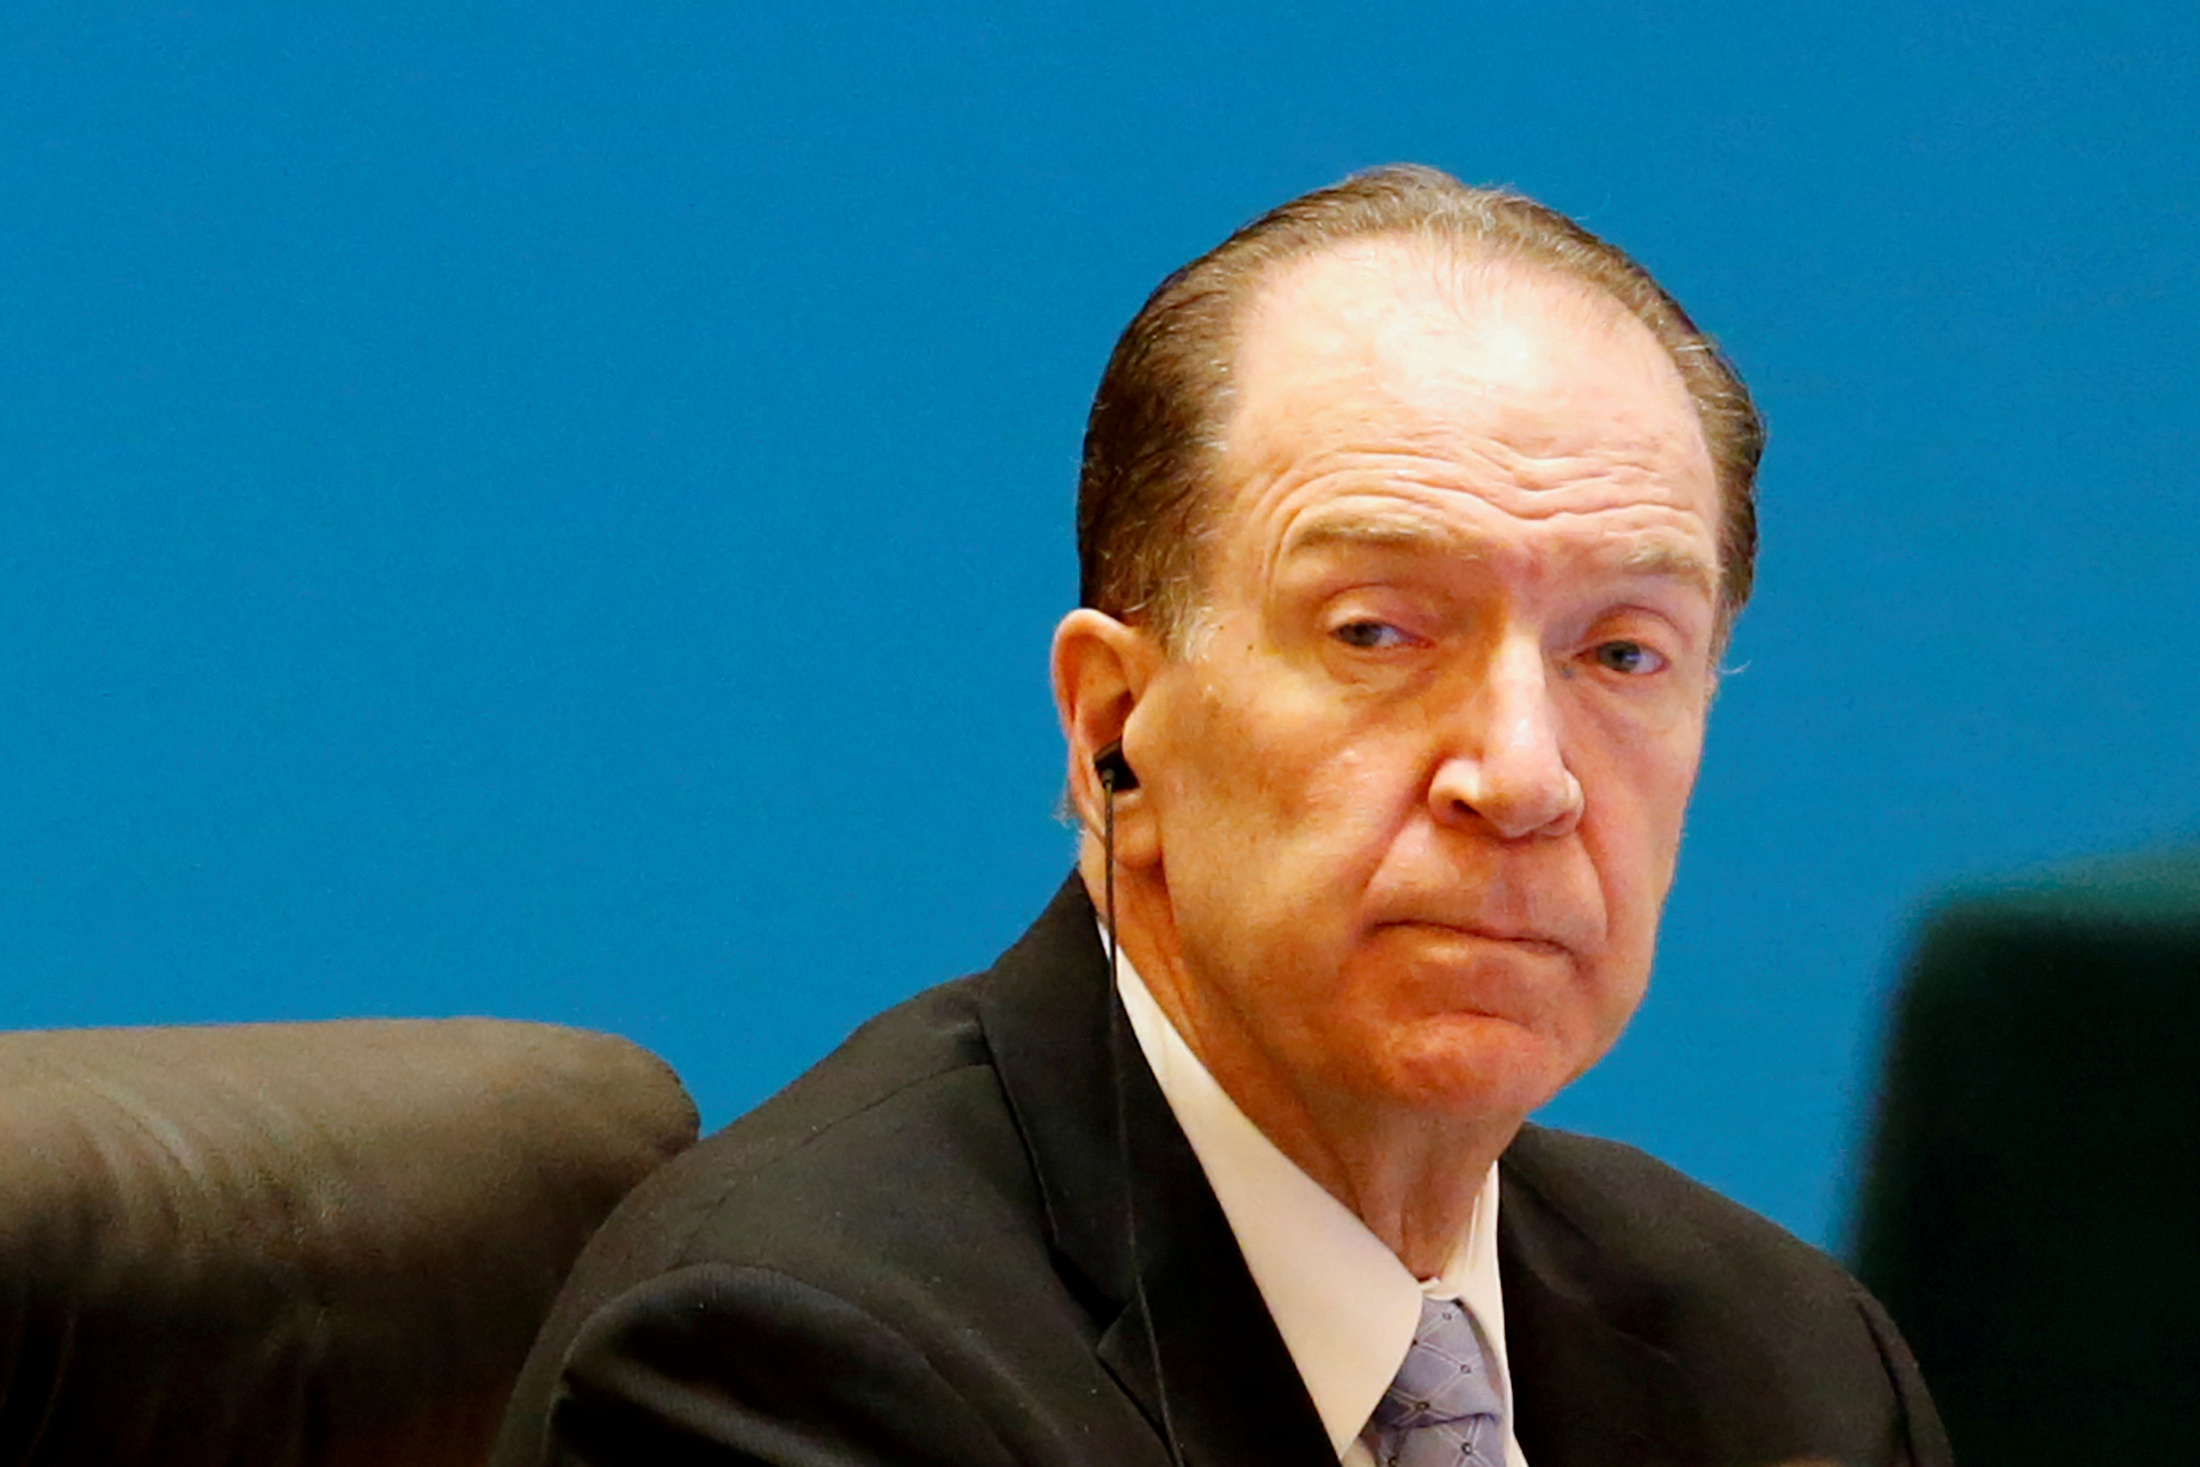 World Bank President David Malpass attends the "1+6" Roundtable meeting at the Diaoyutai state guesthouse in Beijing